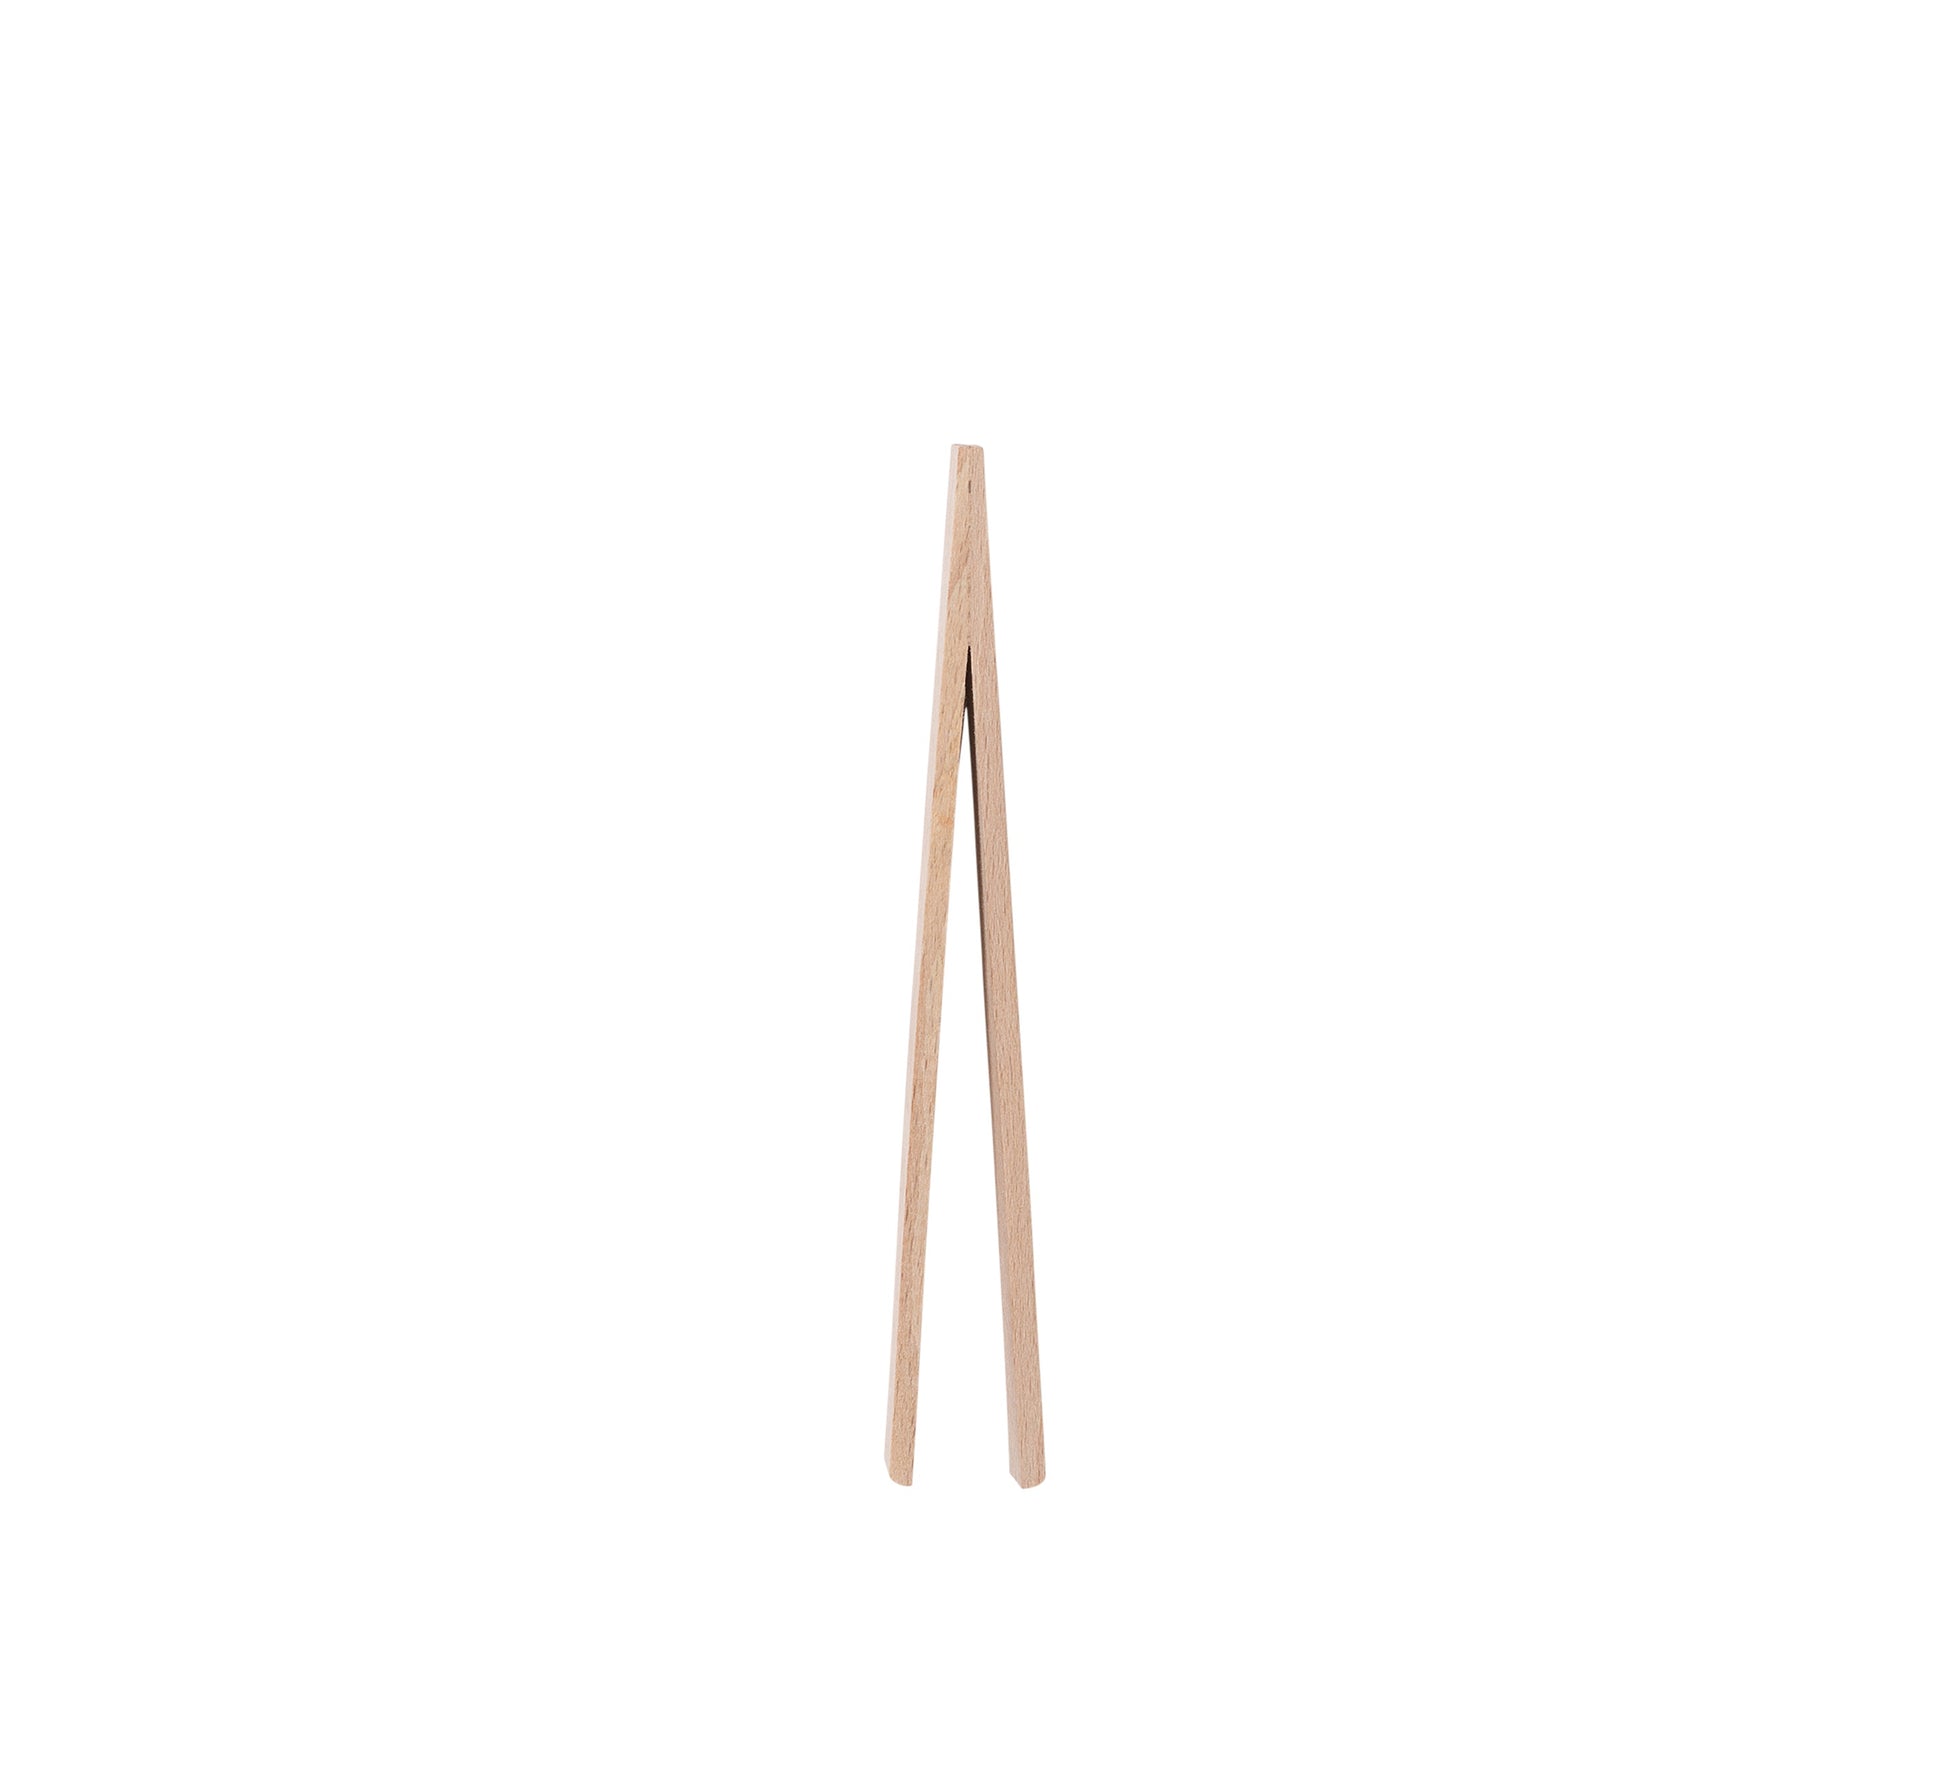 These simple tongs were designed and handcrafted with fine grain beechwood.  They were made in Germany by a manufacturer with over 80 years' experience.  Dimensions: 15cm long